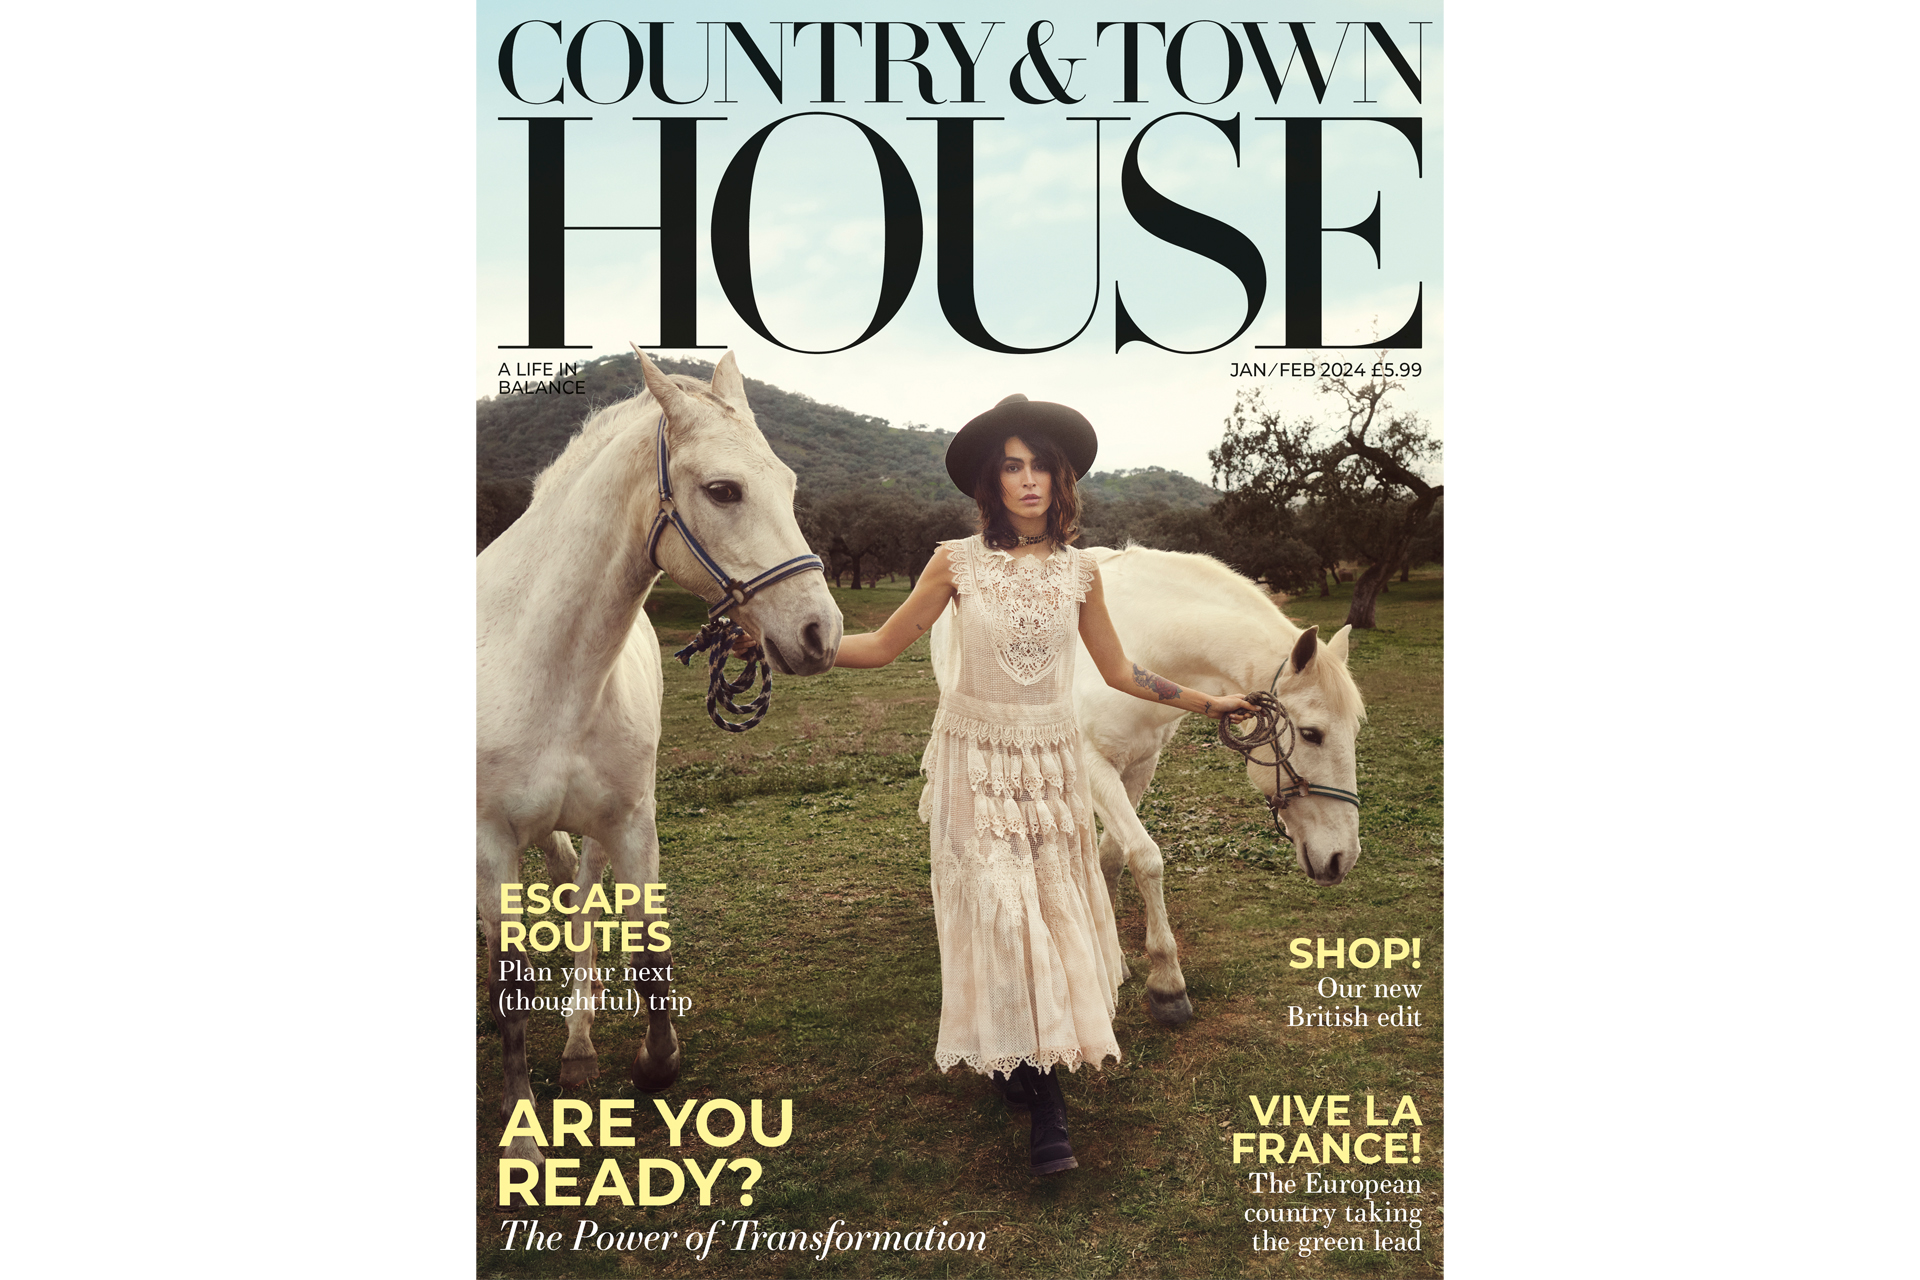 Jan/Feb ’24 Issue of Country & Town House cover